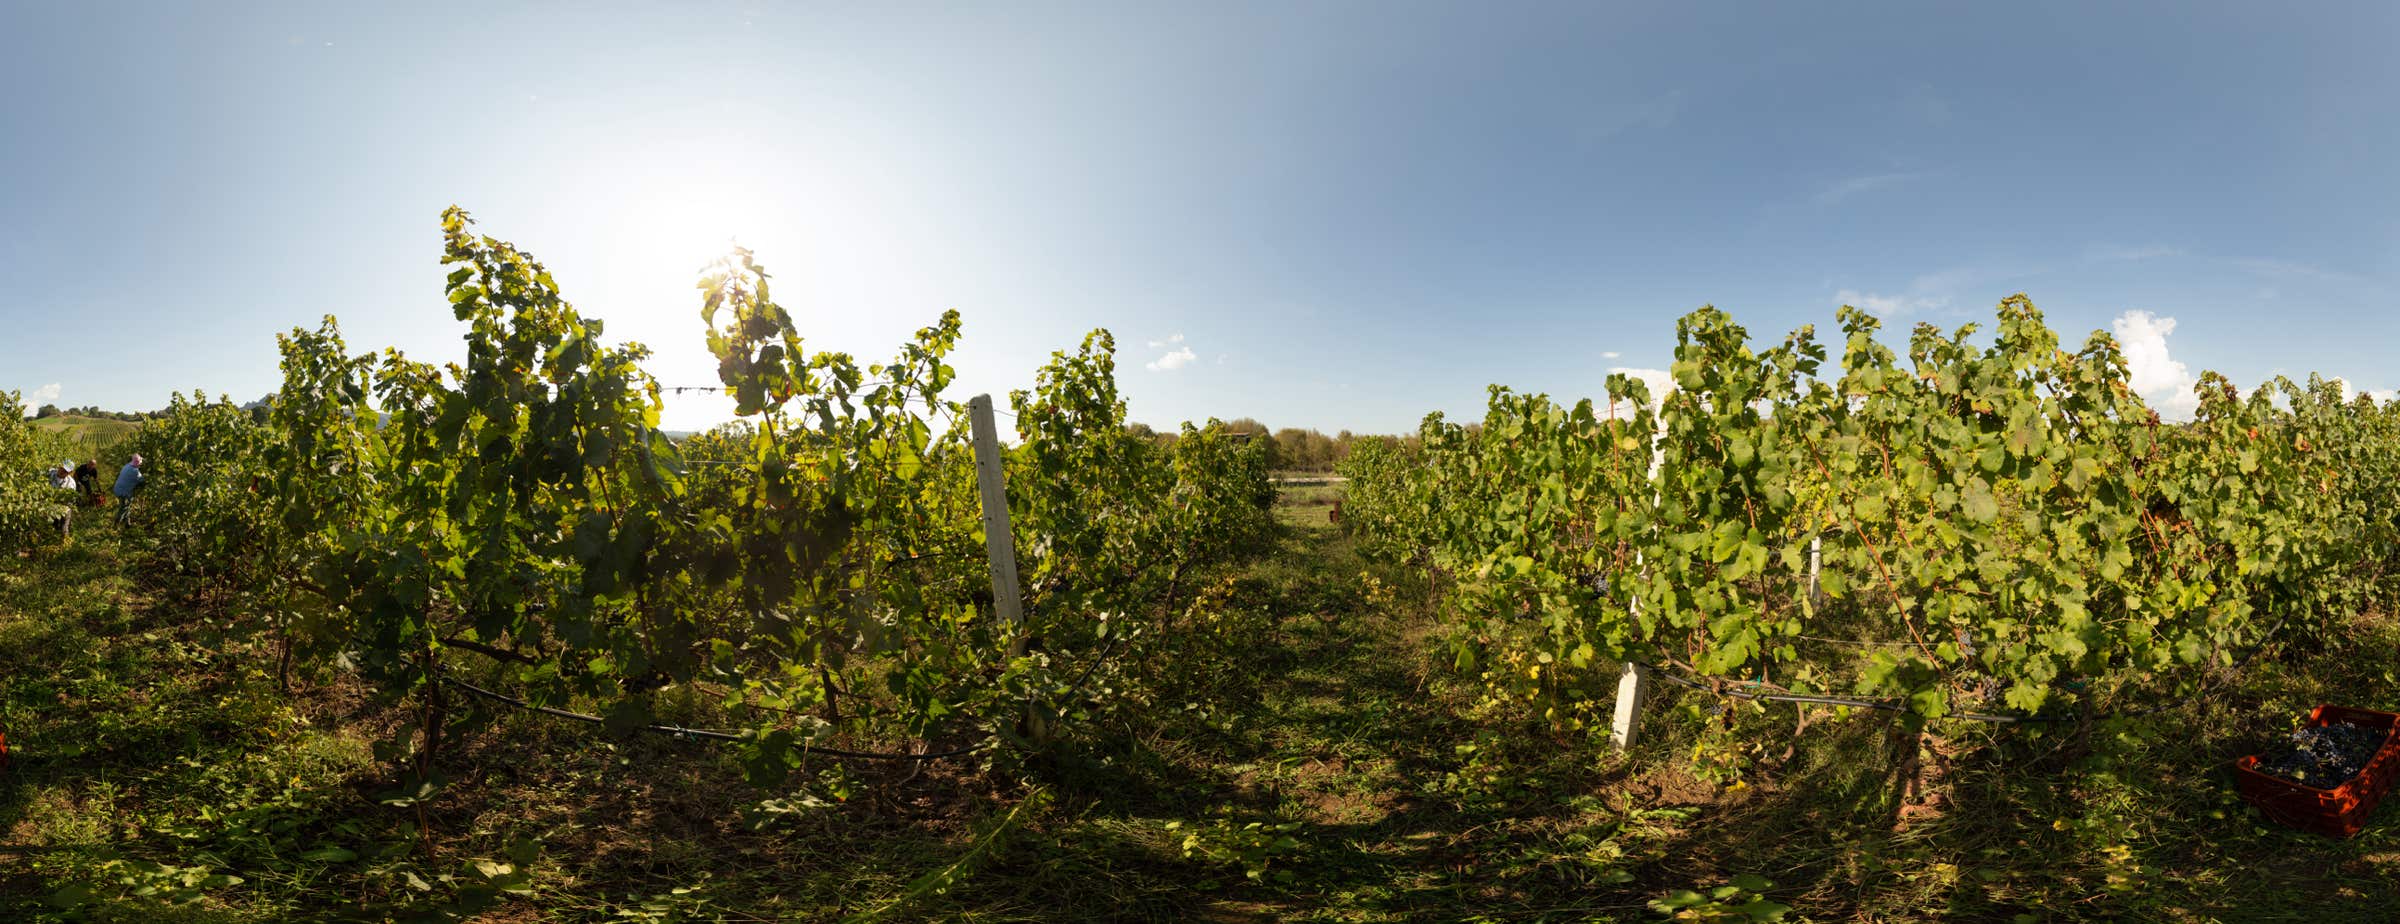 The image shows a 360° view between grapevines of a vineyards. Workers are harvesting grapes.